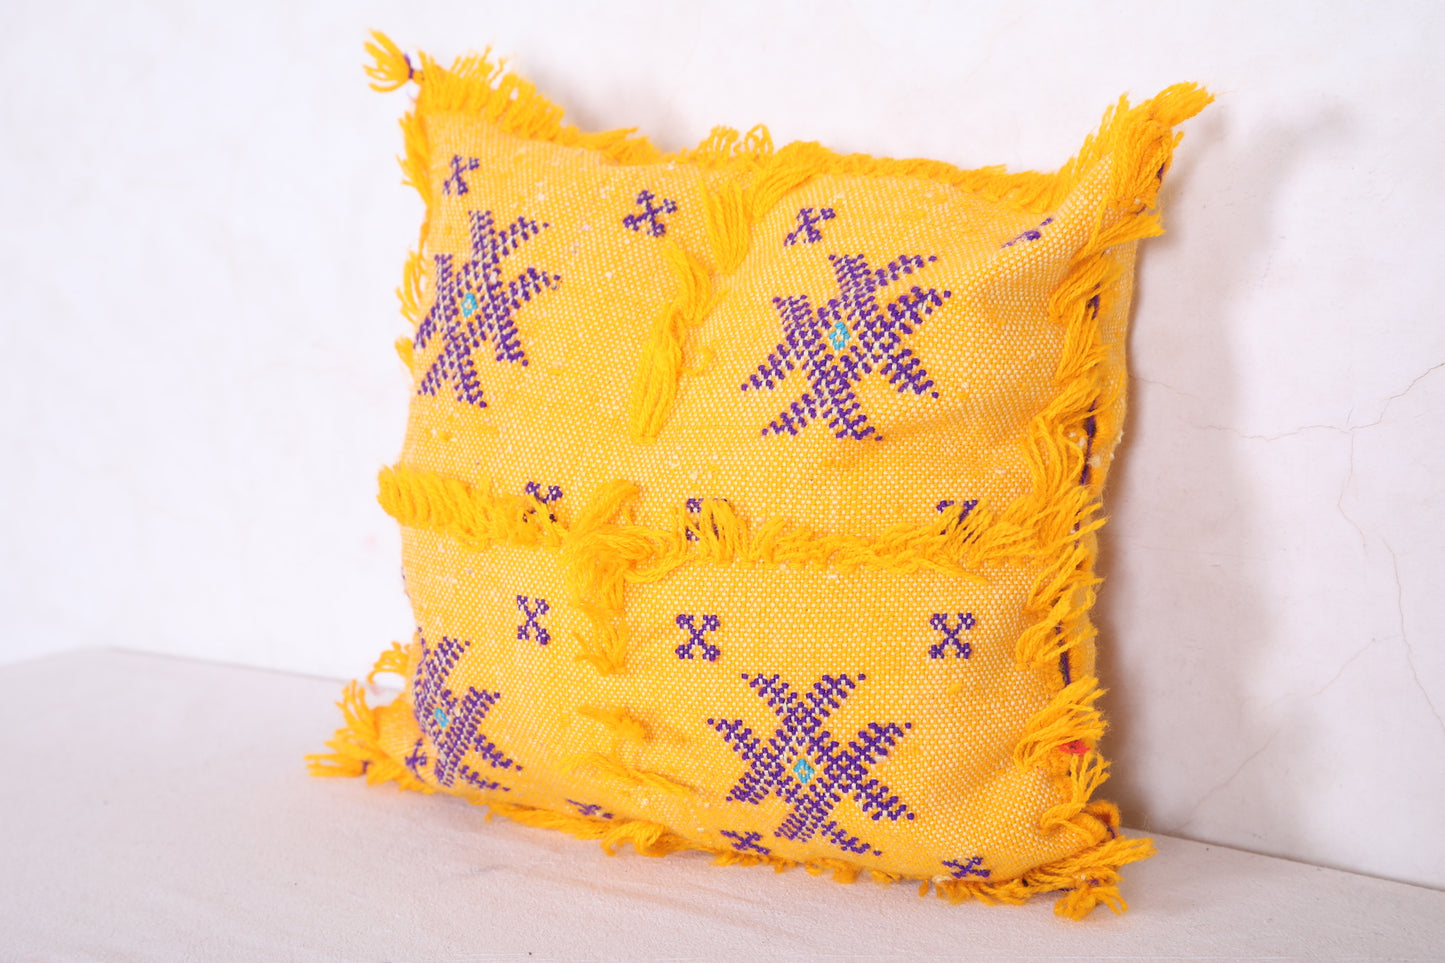 Moroccan handmade kilim pillow 13.3 INCHES X 14.1 INCHES